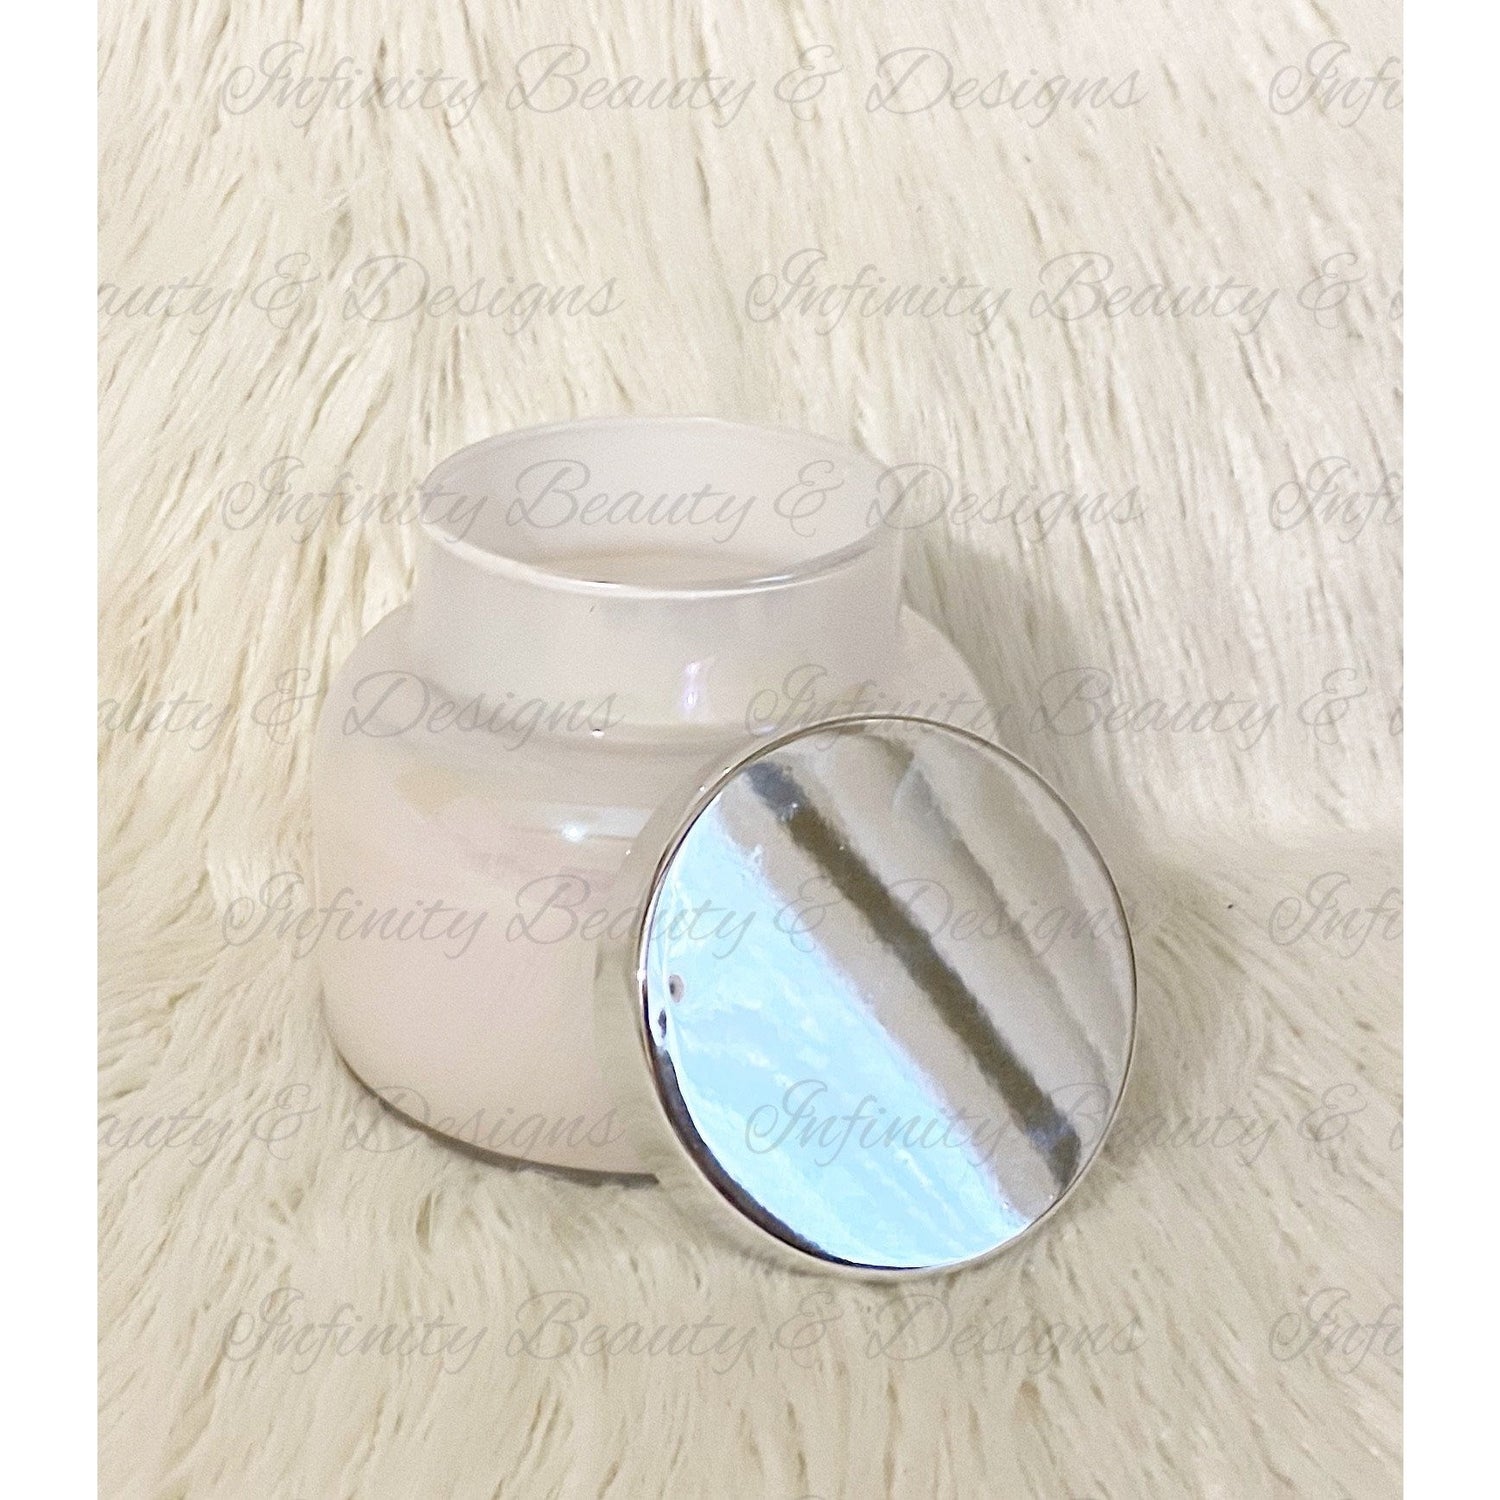 Iridescent Candle with Lid-Infinity Beauty & Designs